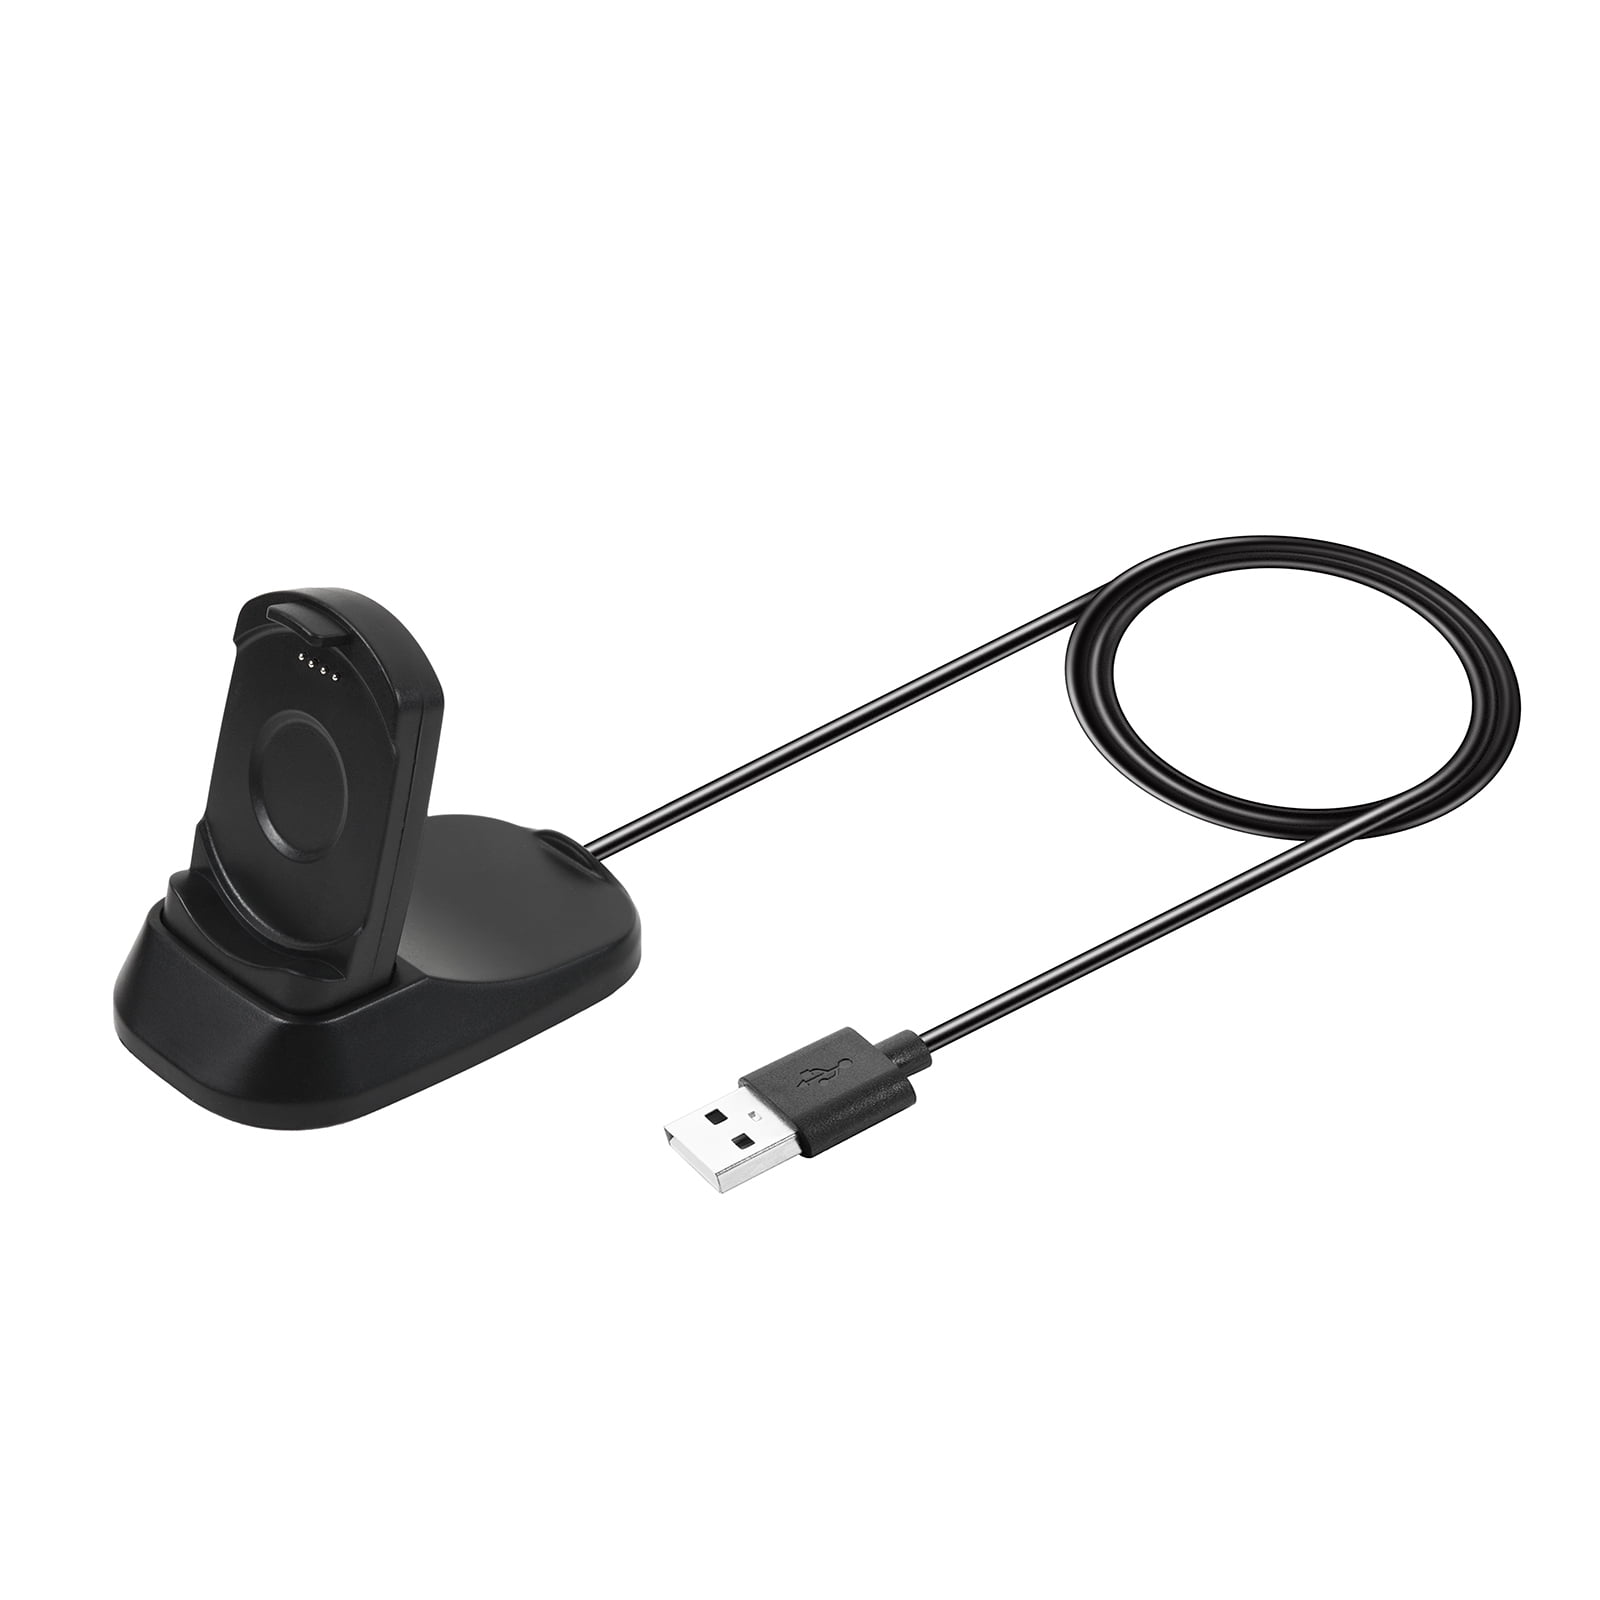 For TicWatch Pro Charger USB Cable Dock